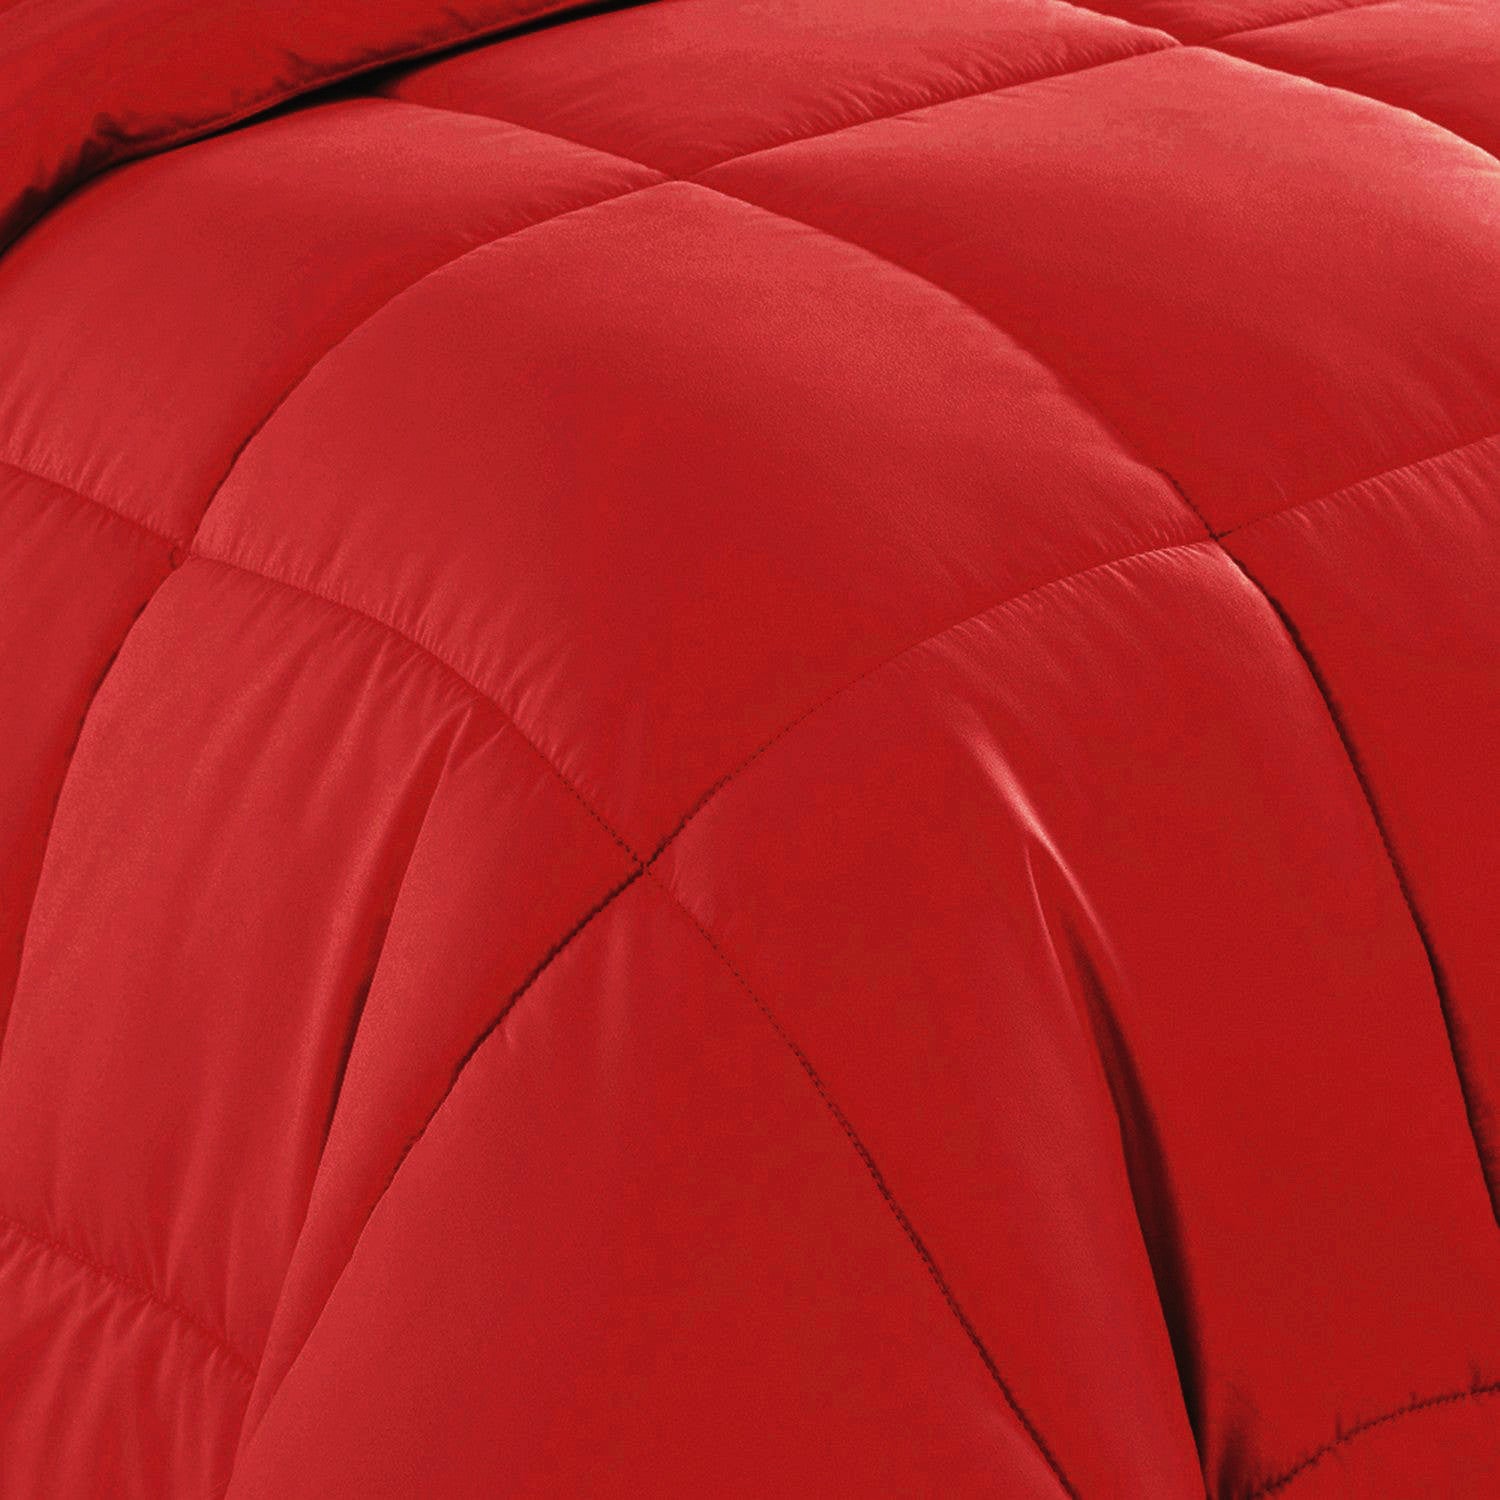 Essential 7-Piece Bed in a Bag Set Red - Detail